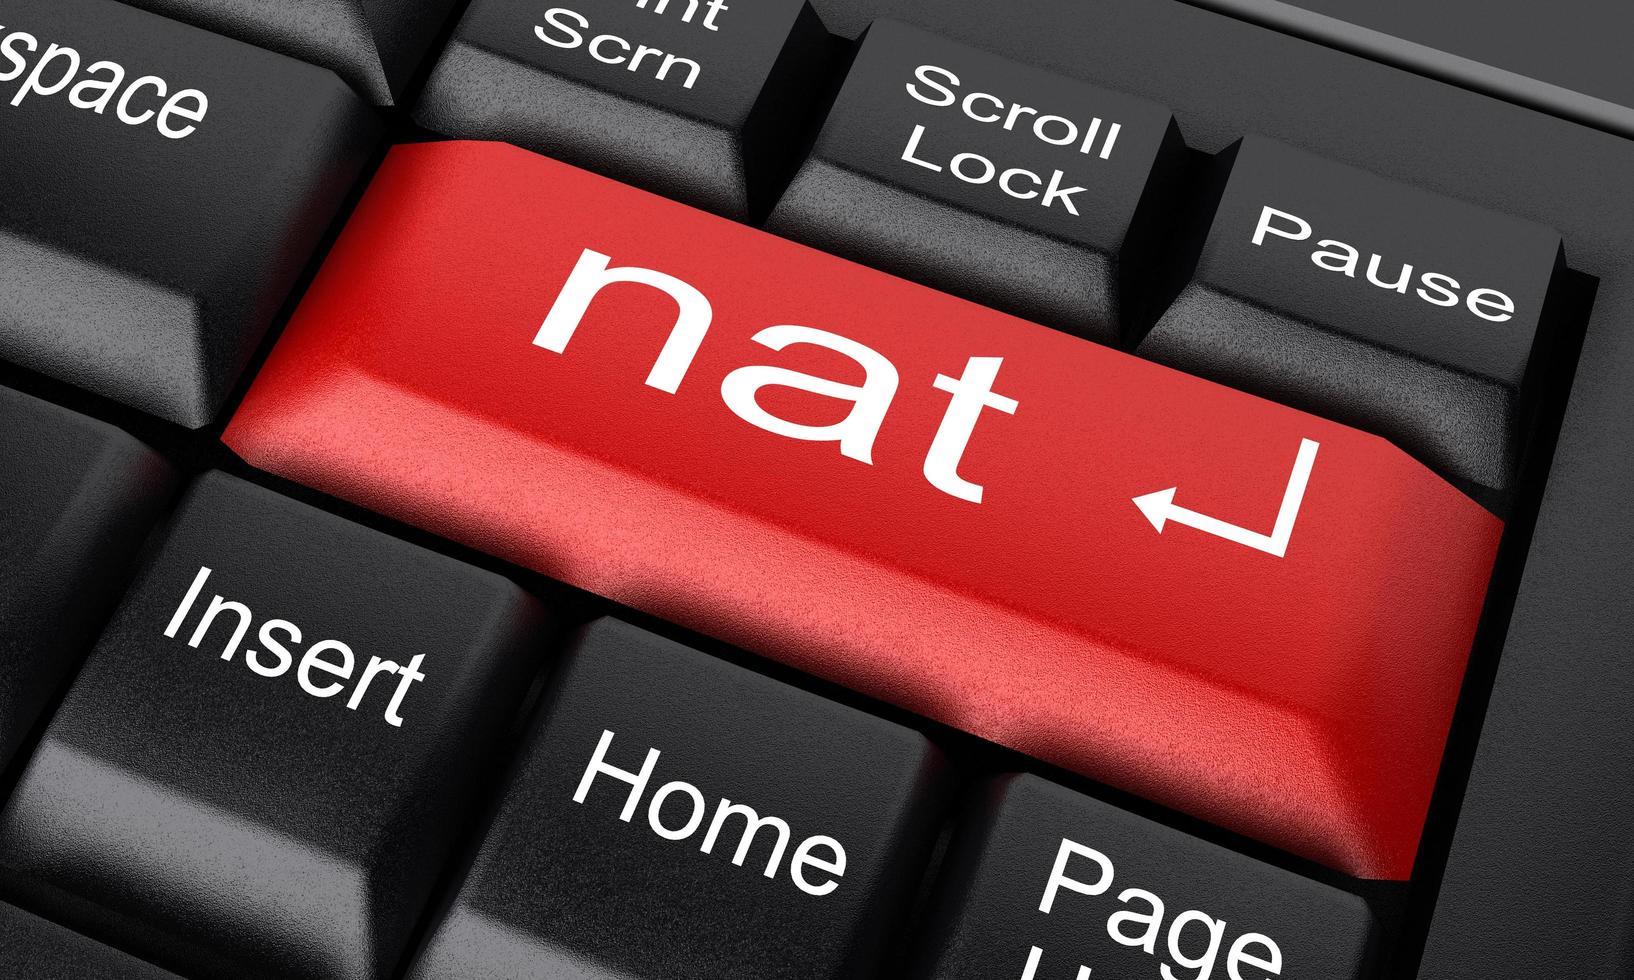 nat word on red keyboard button photo